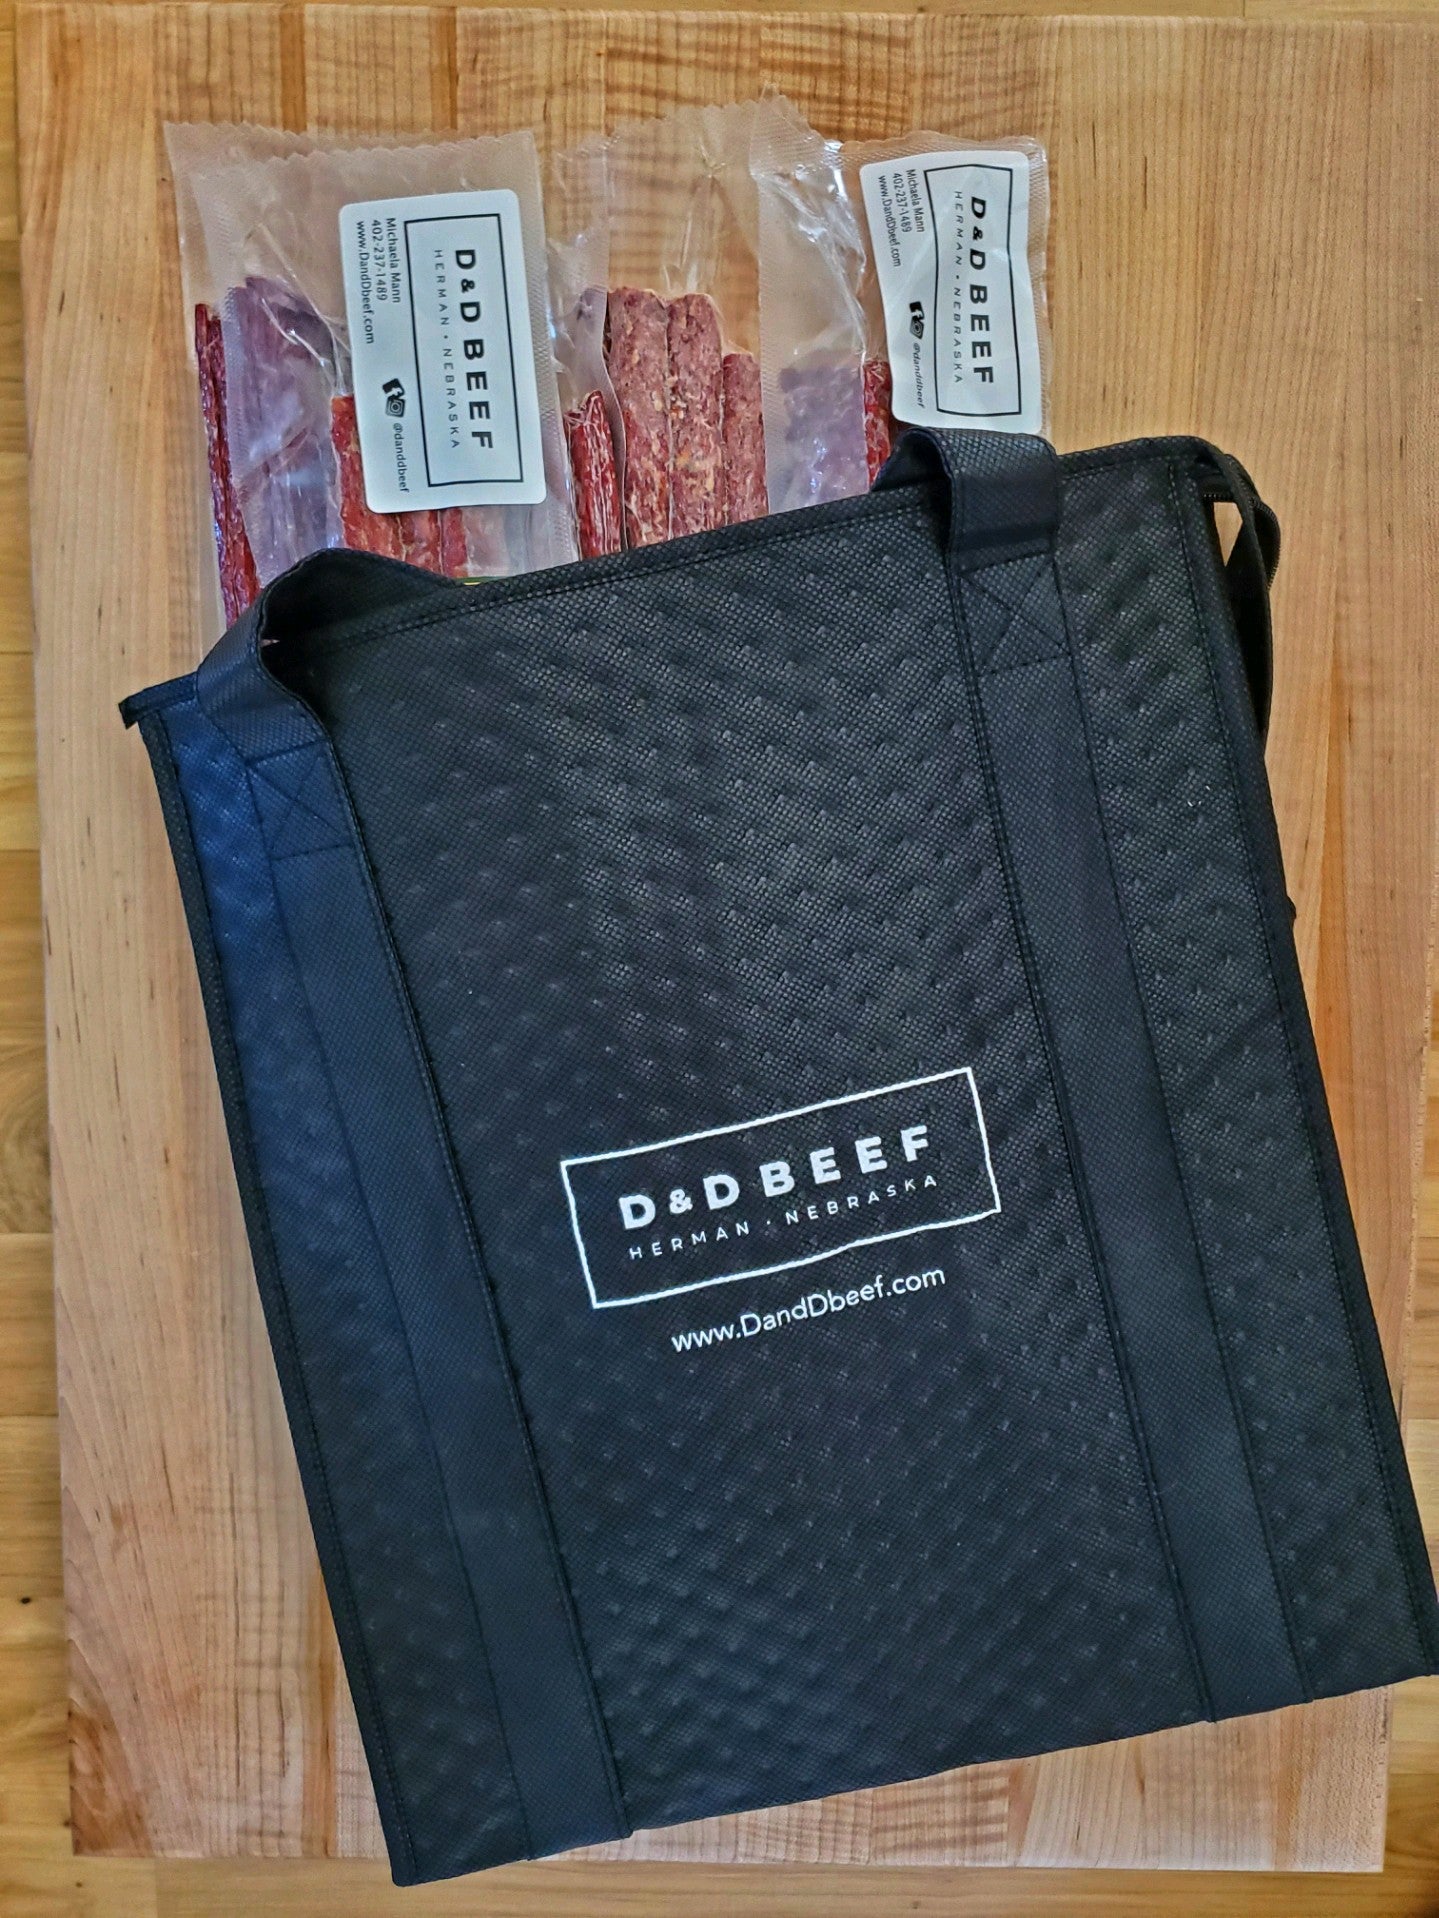 Black insulated tote from D&D Beef in Nebraska